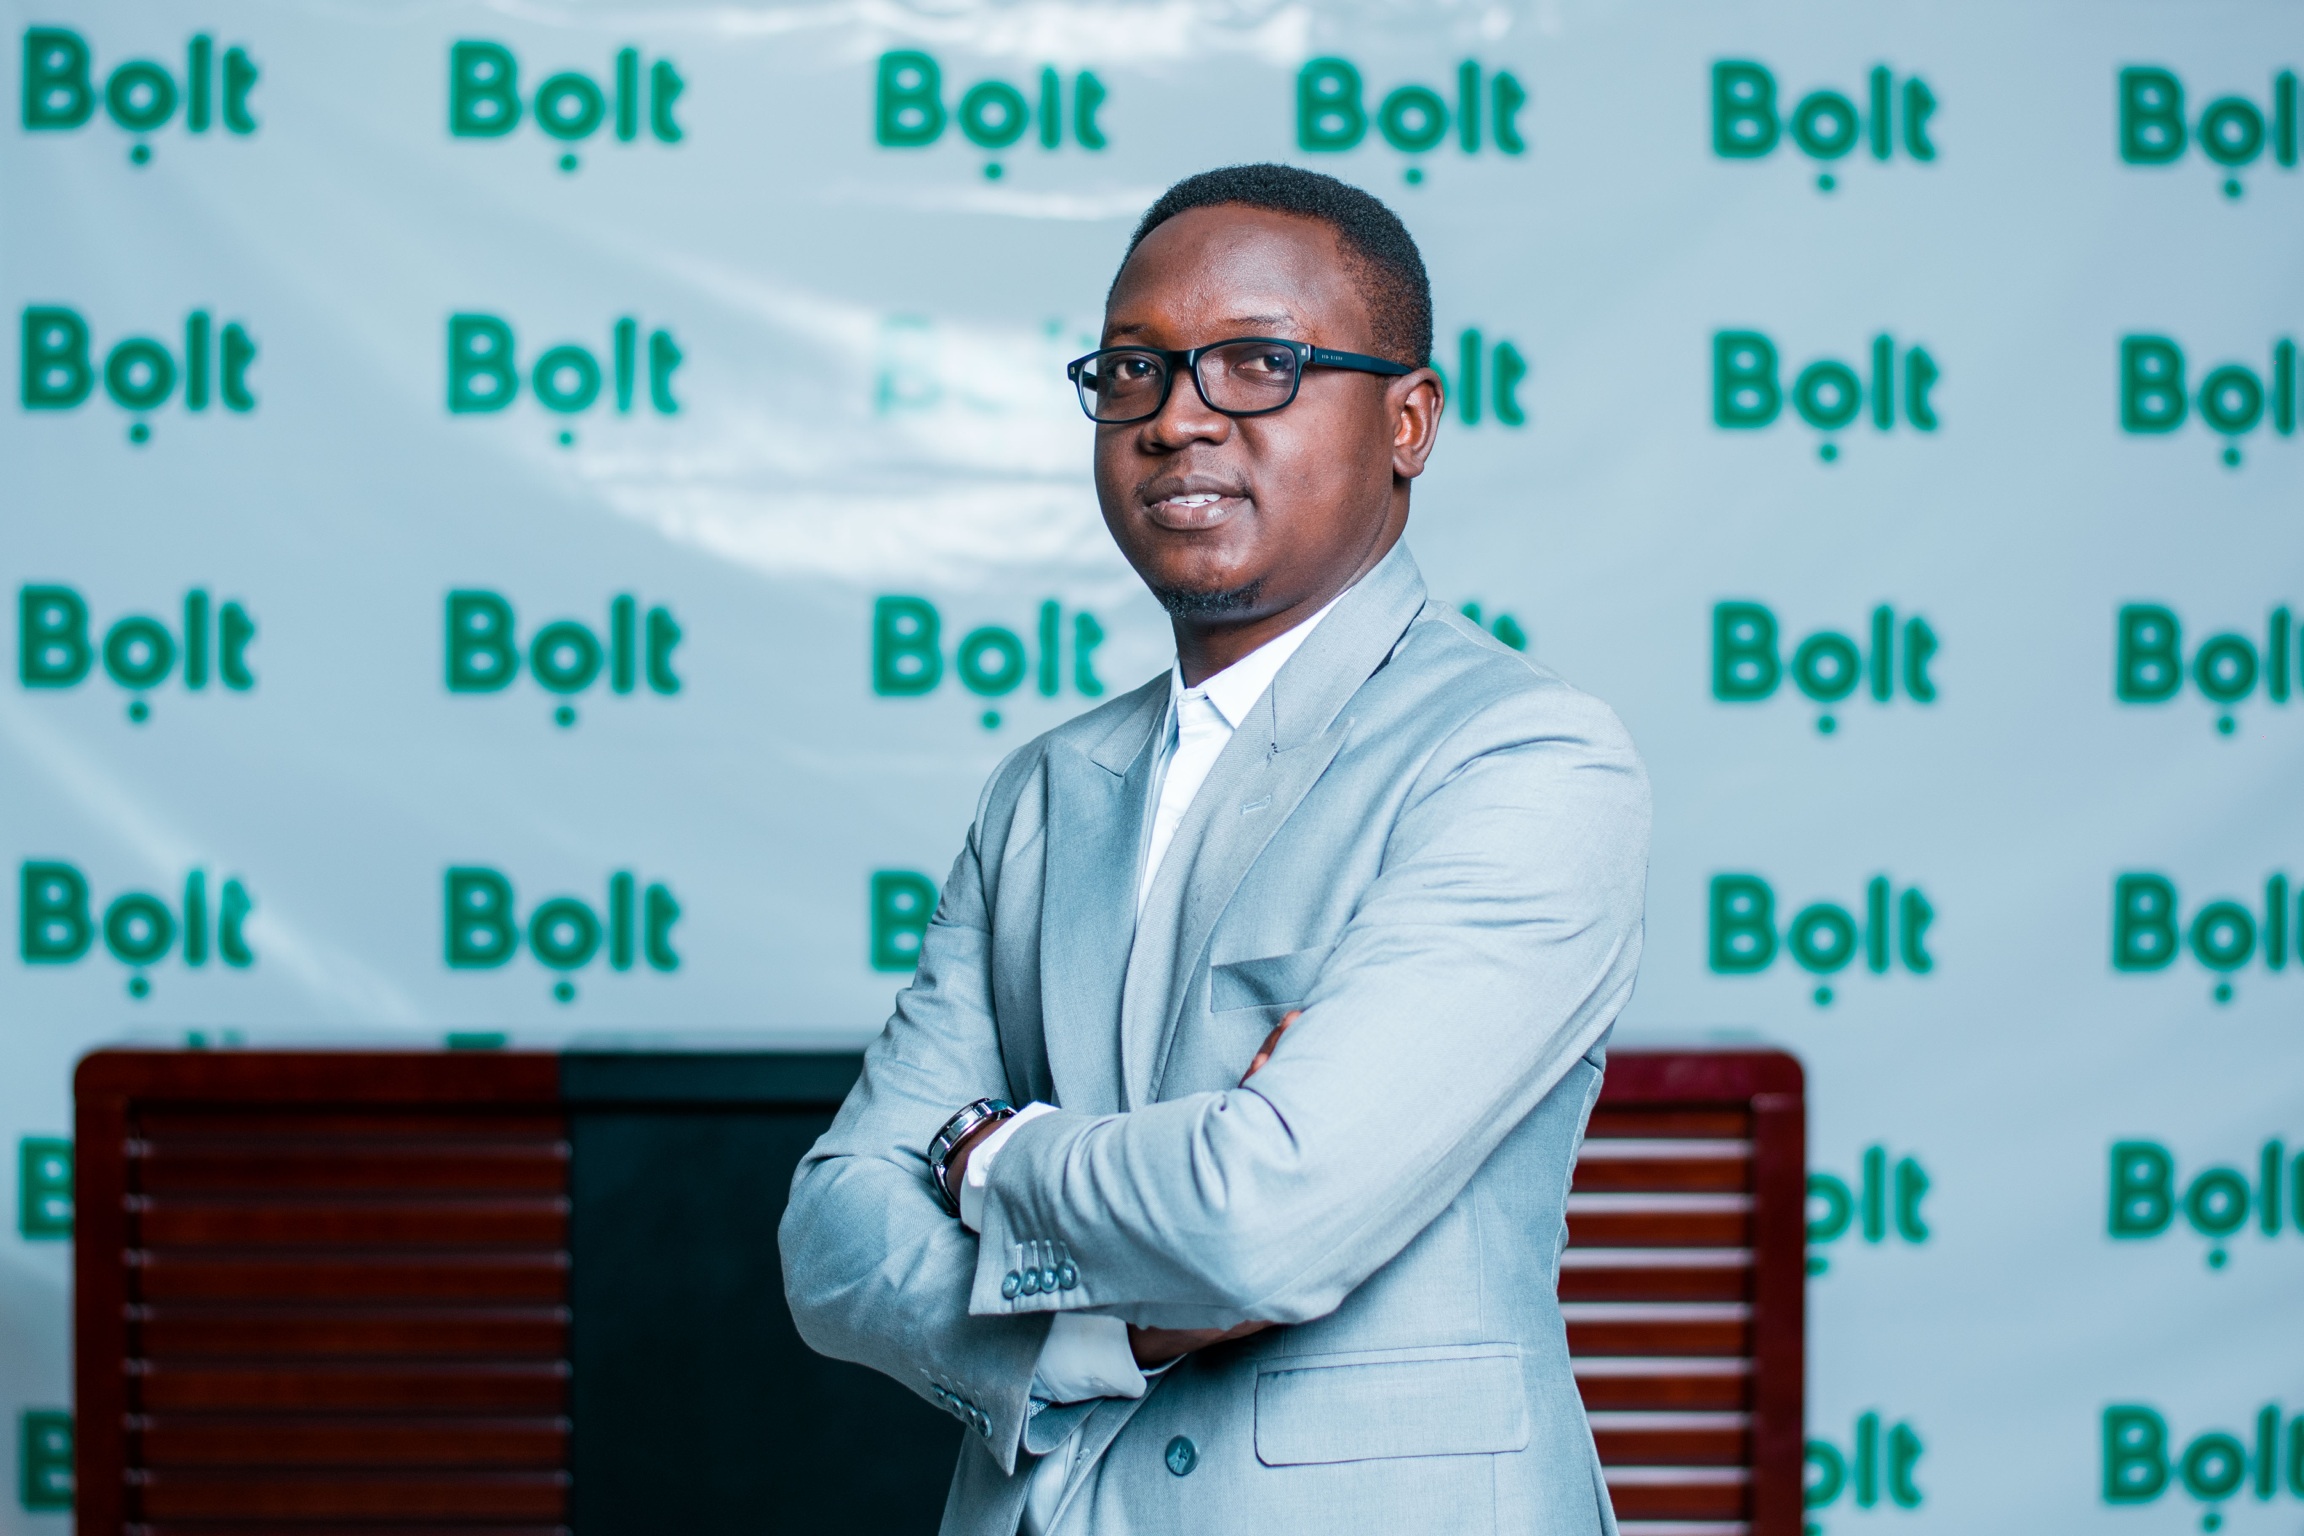 Olaoluwa Akinnusi joins Bolt as the new Country manager for Kenya